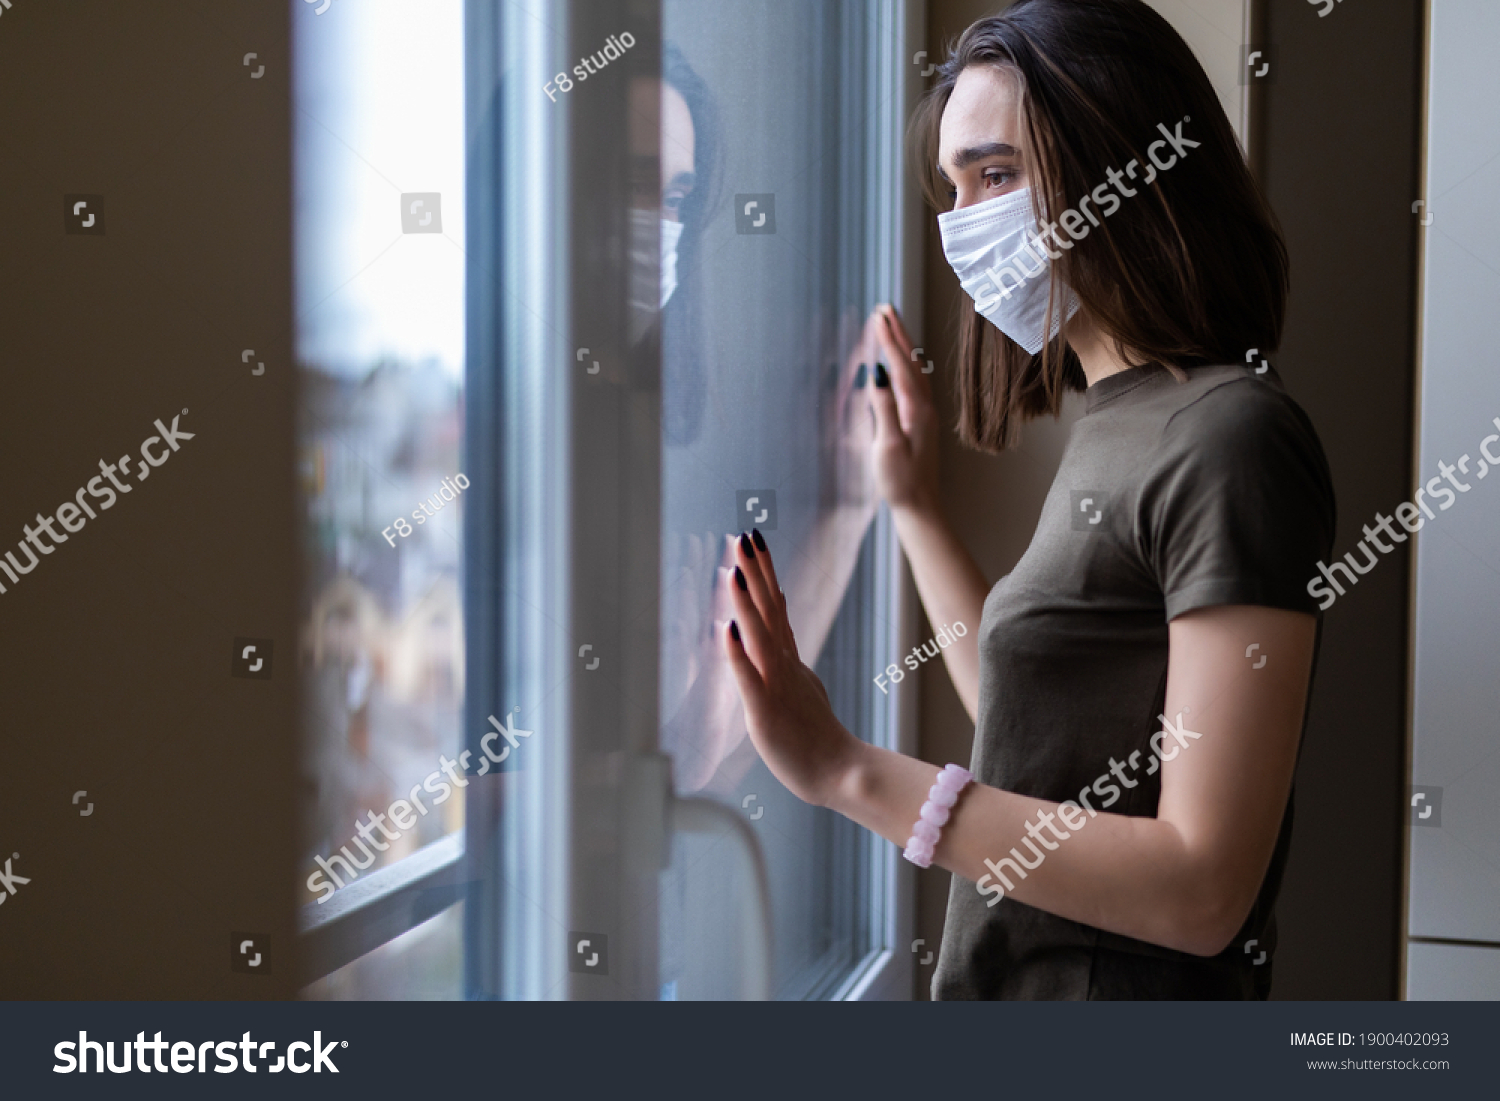 Sad young woman in a medical mask looks out of the window. Quarantine during the coronavirus pandemic. #1900402093